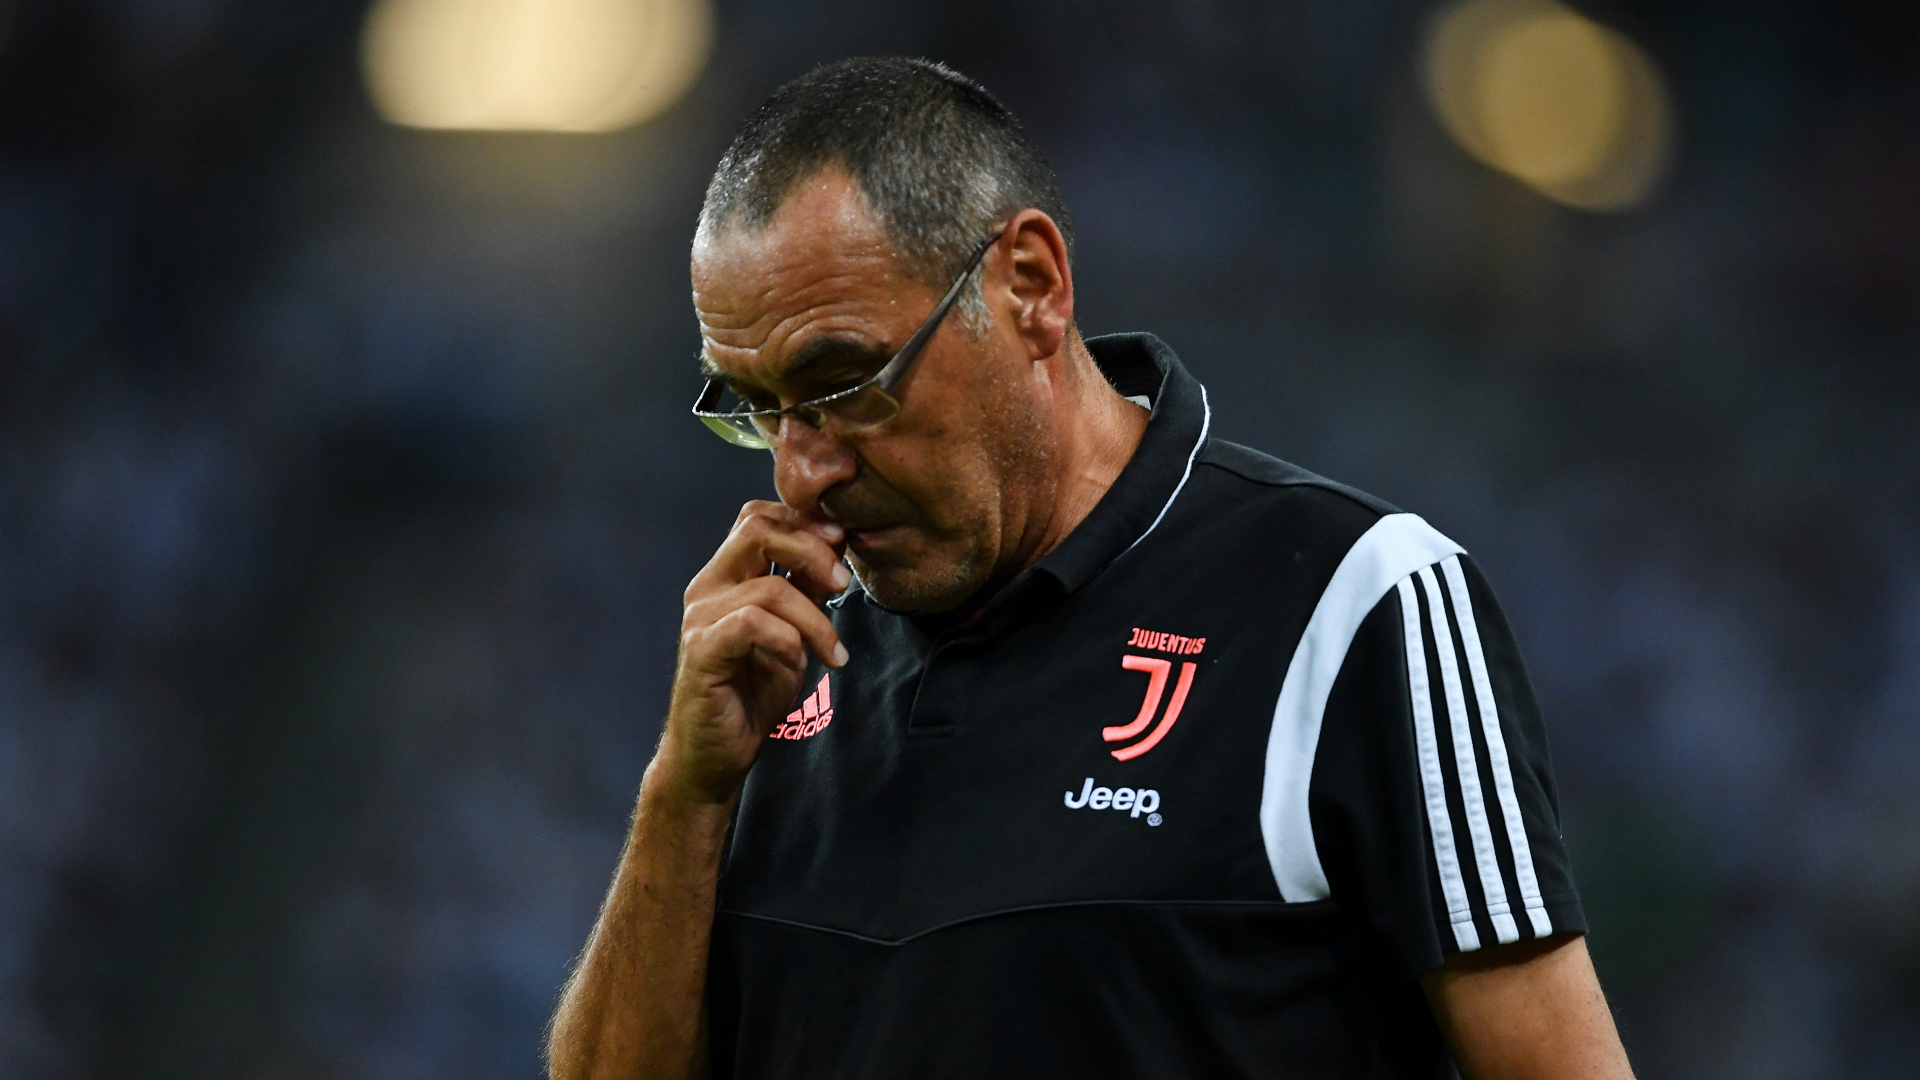 Maurizio Sarri and Juventus was a match made in hell